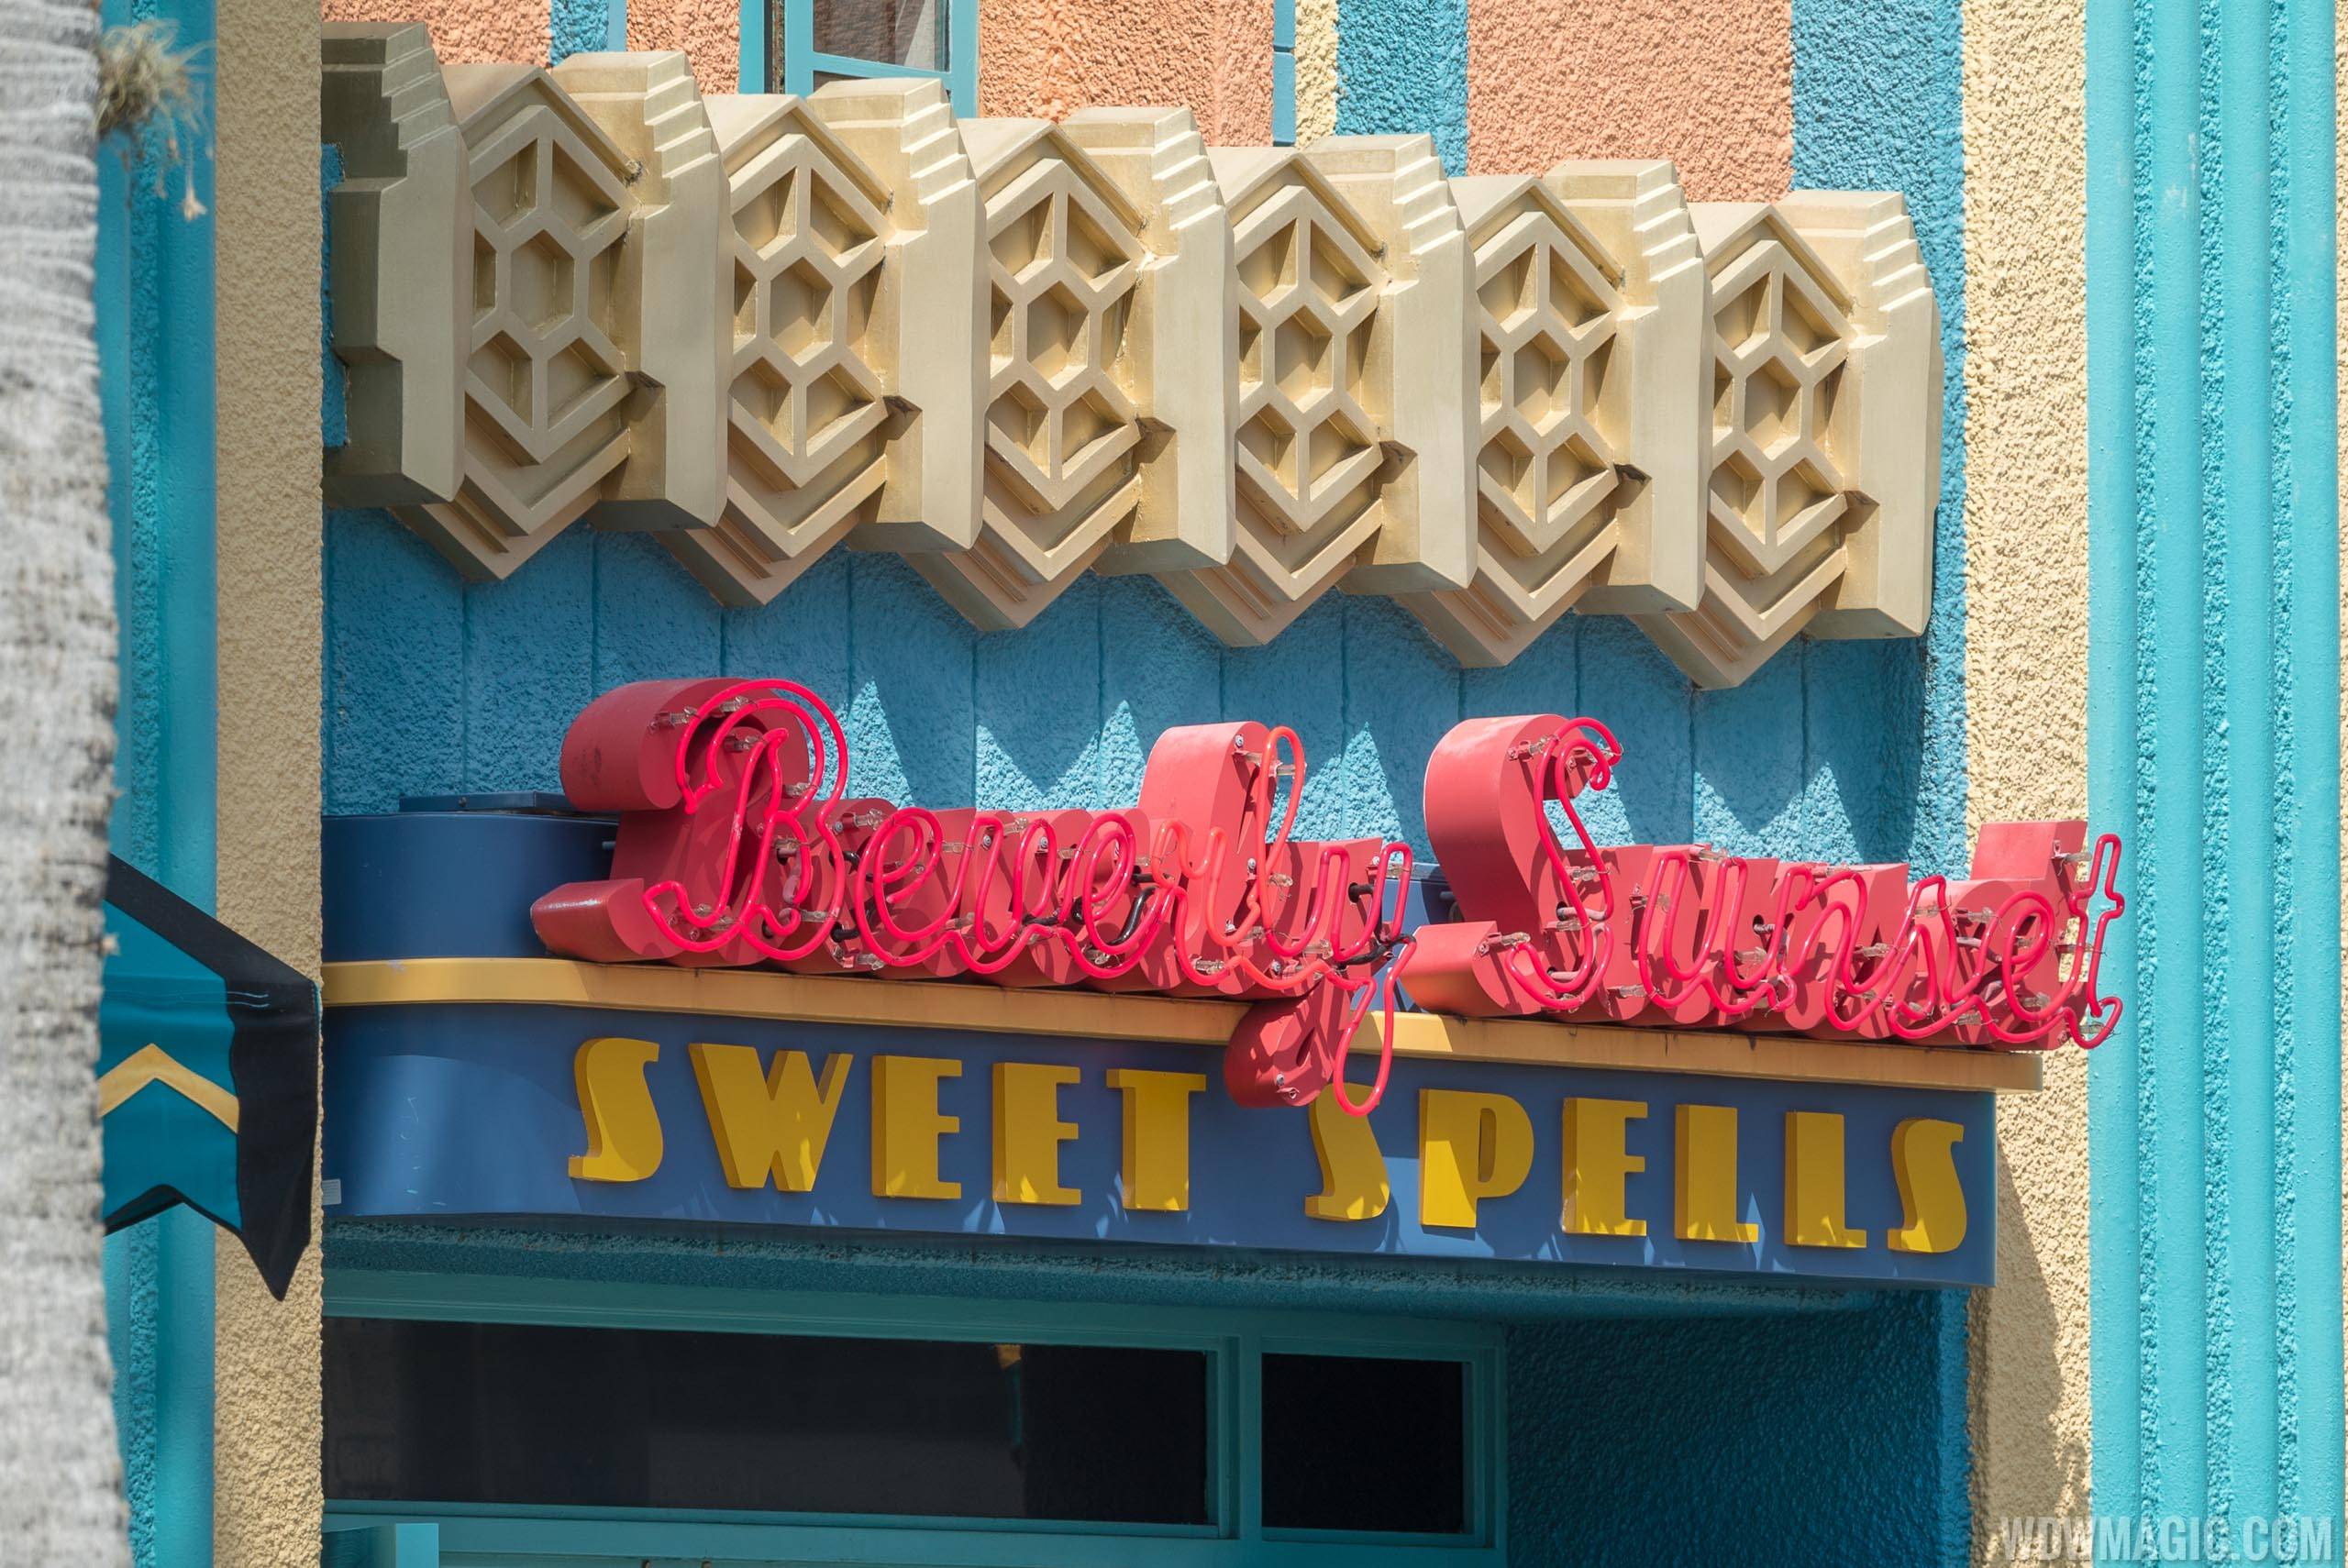 Sweet Spells at Disney's Hollywood Studios permanently closing later this month